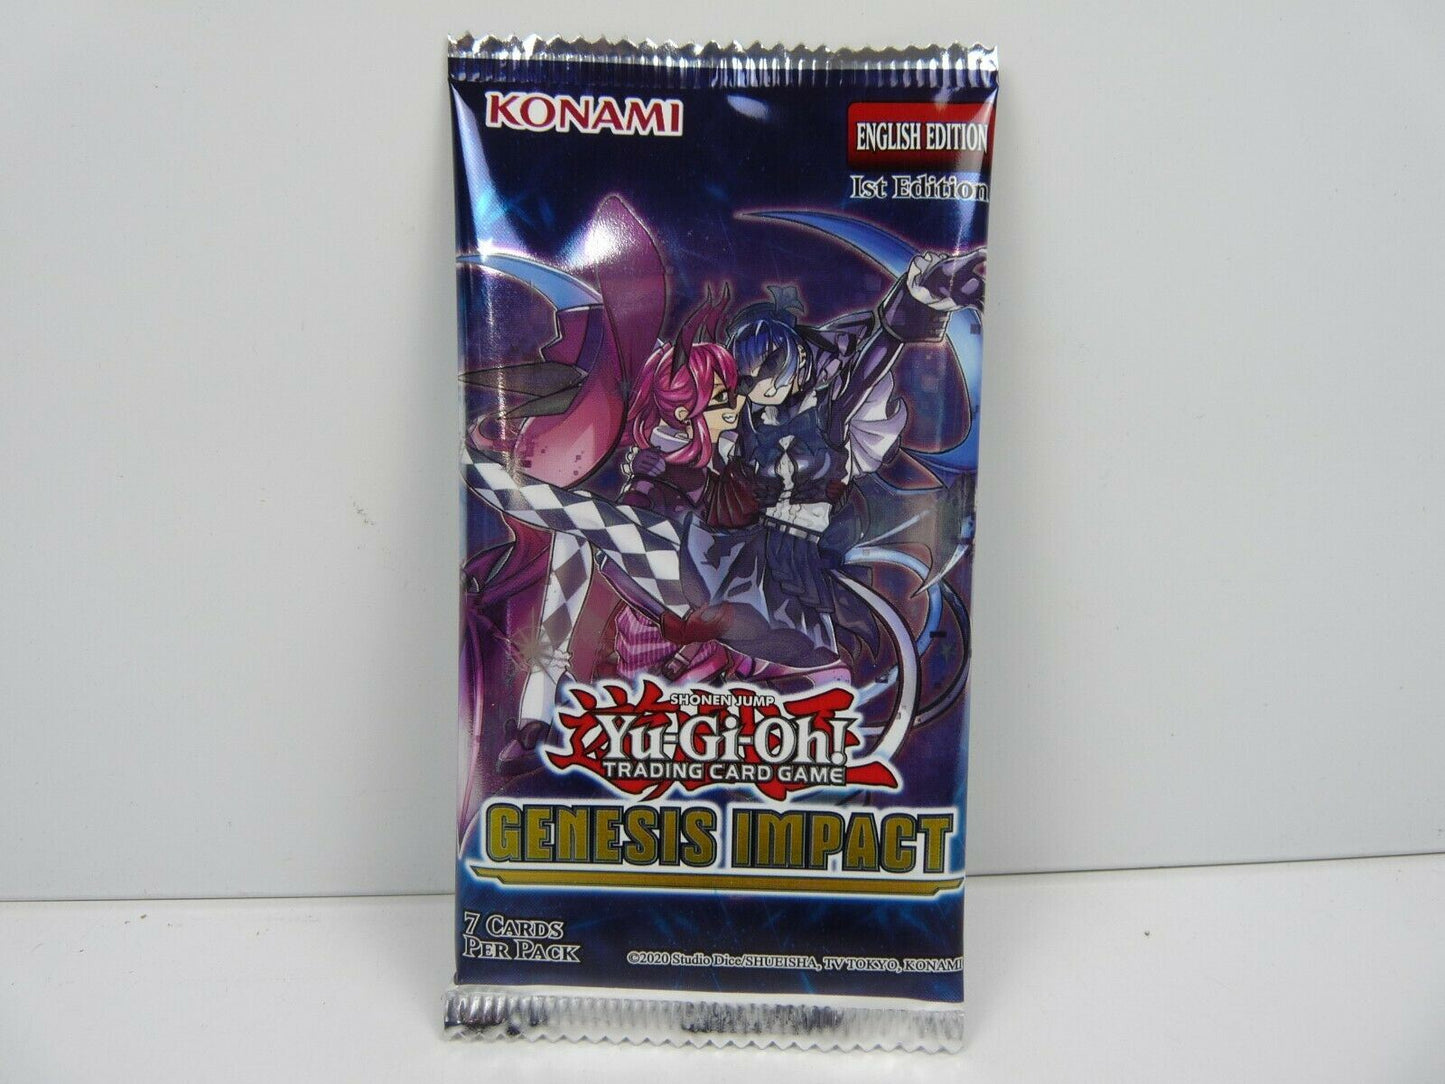 YU-GI-OH lot 3 x booster pack scellé Genesis Impact 1st edition English 7 cards